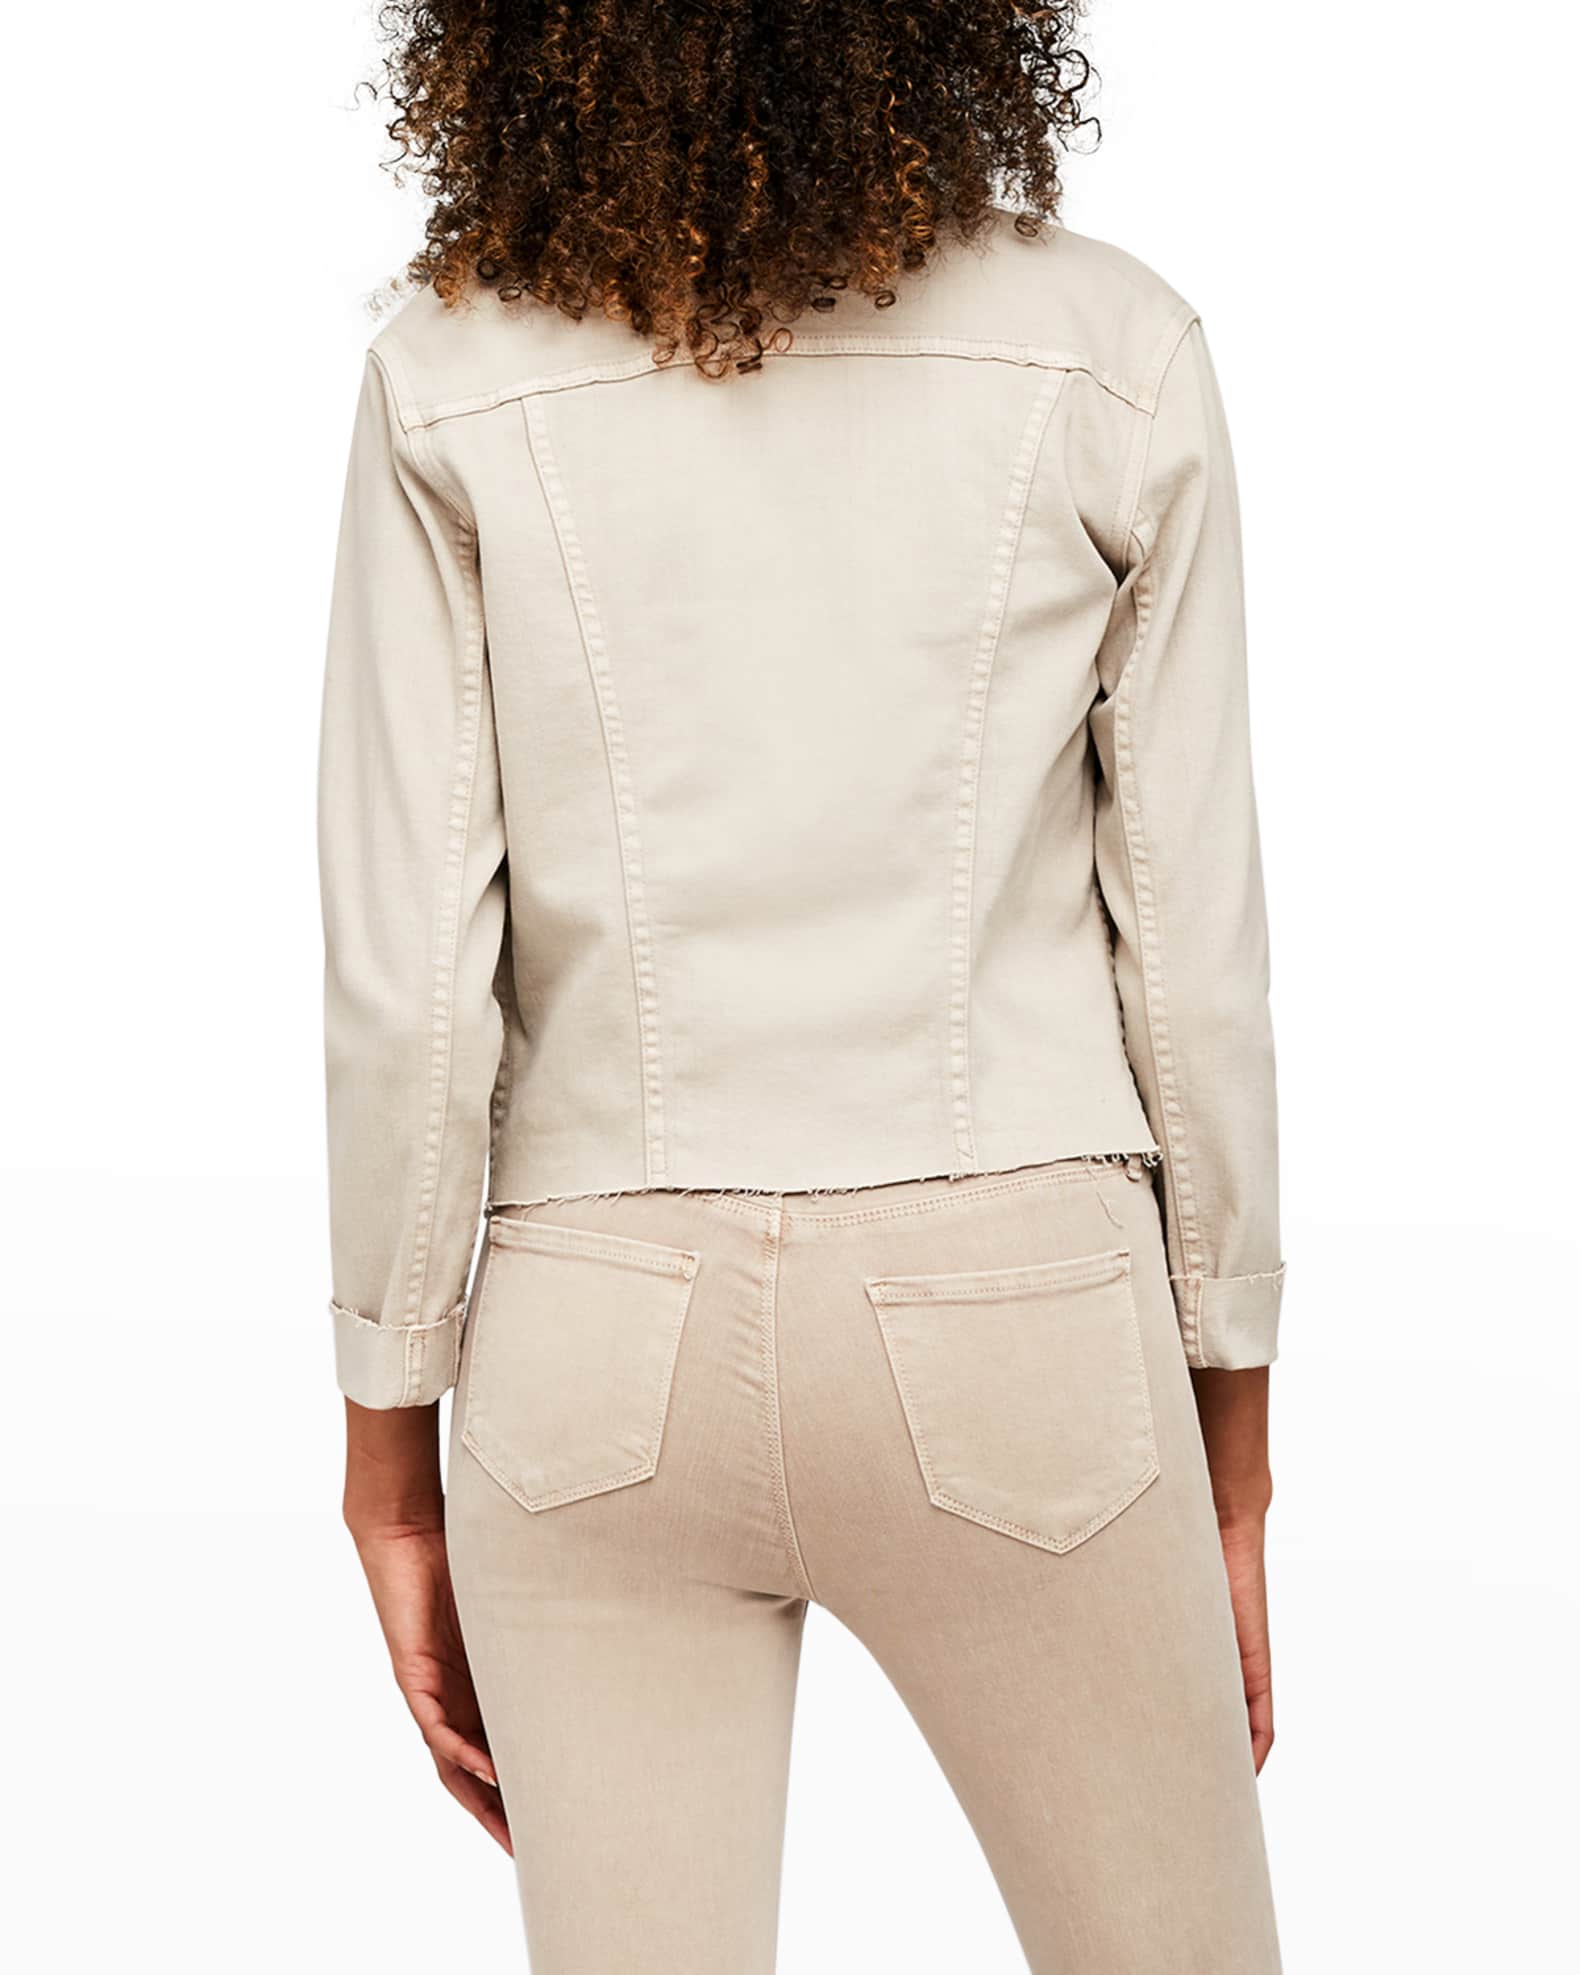 L'Agence Janelle Slim Cropped Jean Jacket with Raw Hem | Neiman Marcus